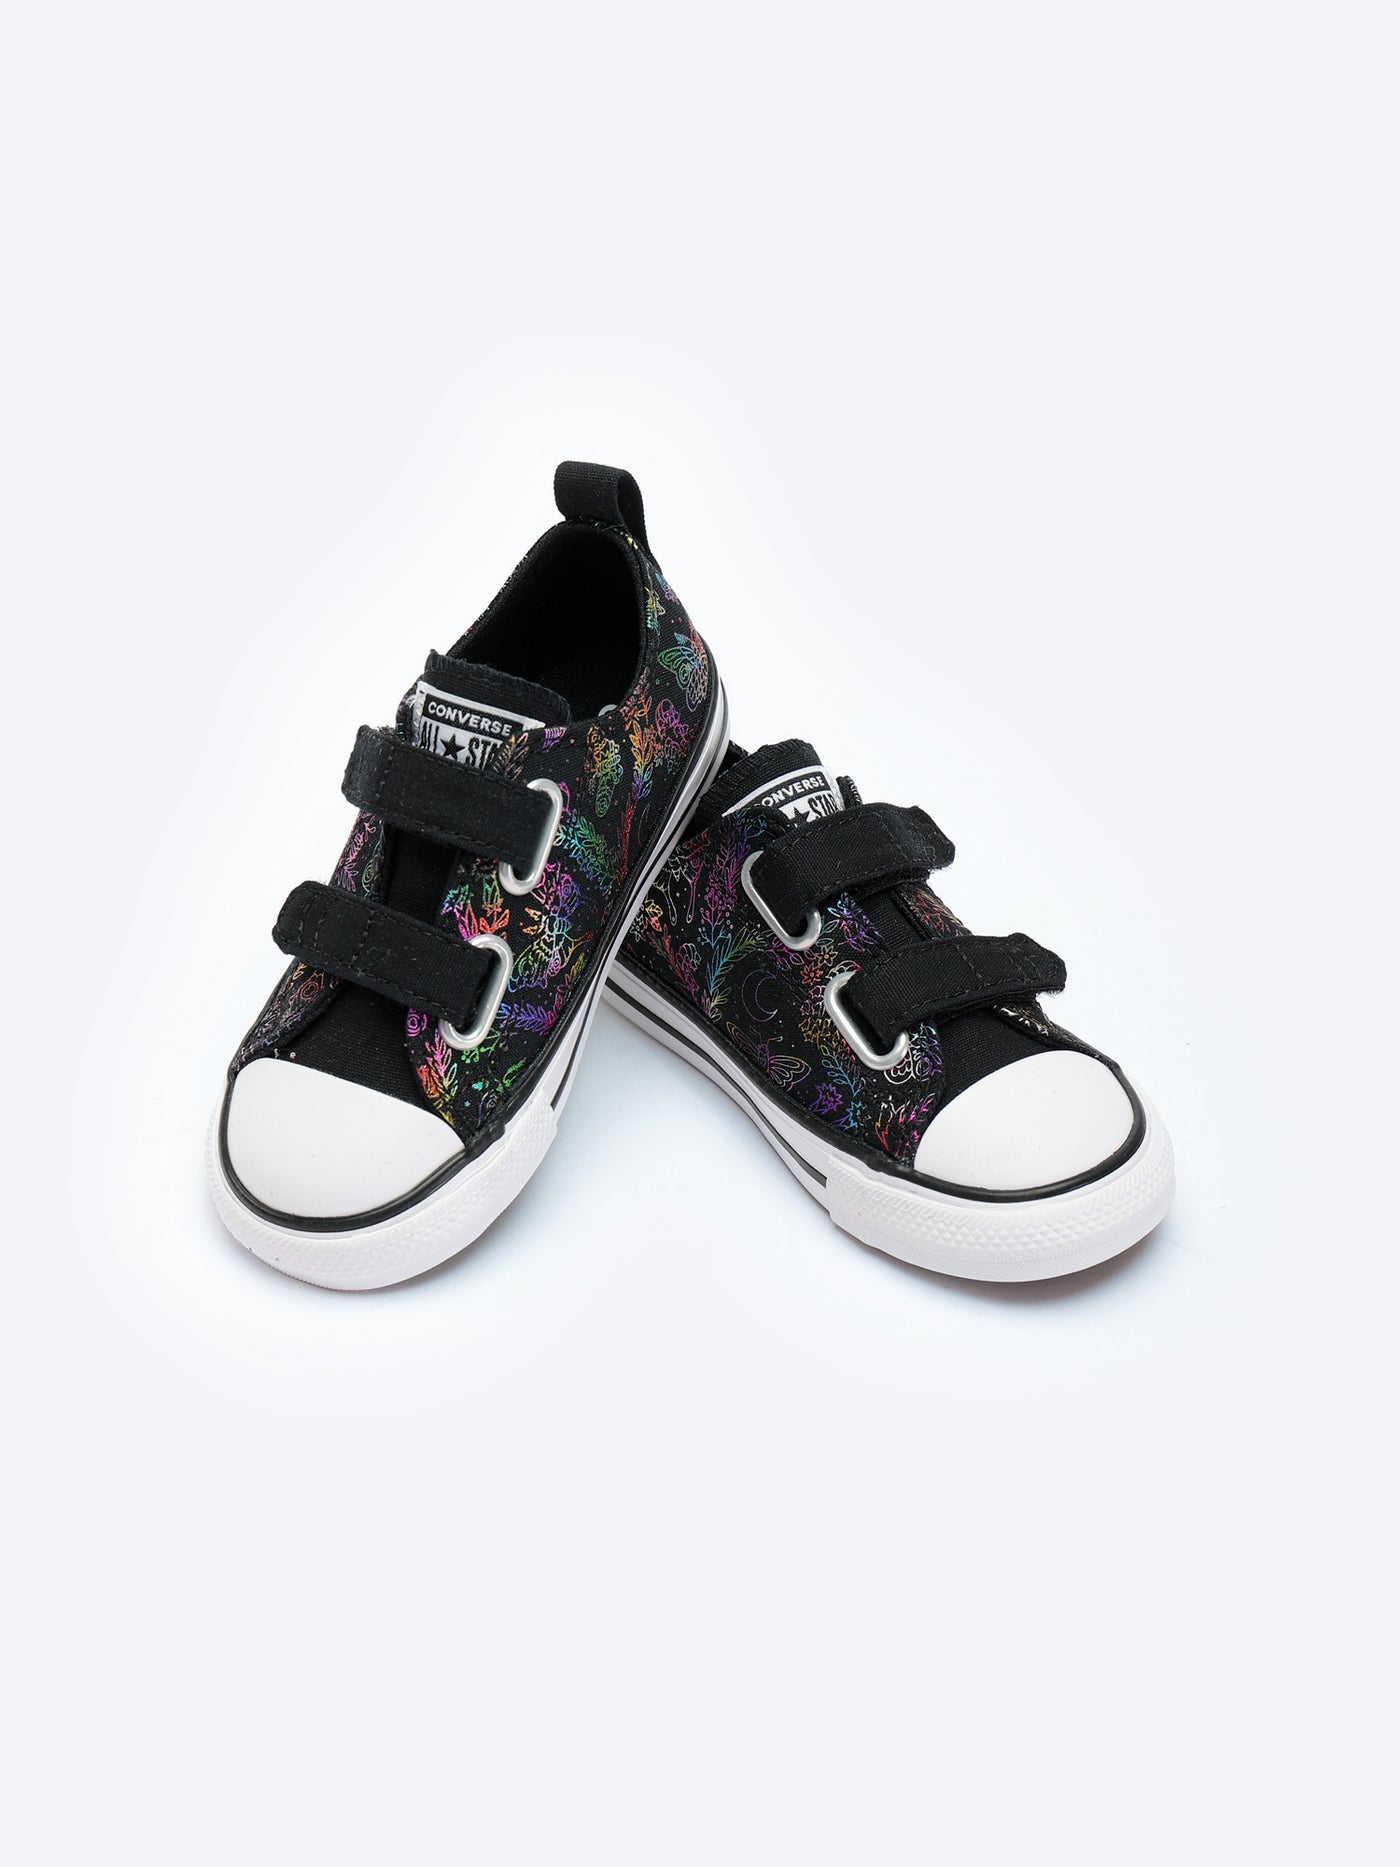 Converse Kids Ctas 2v Iridescent Butterfly Sneakers